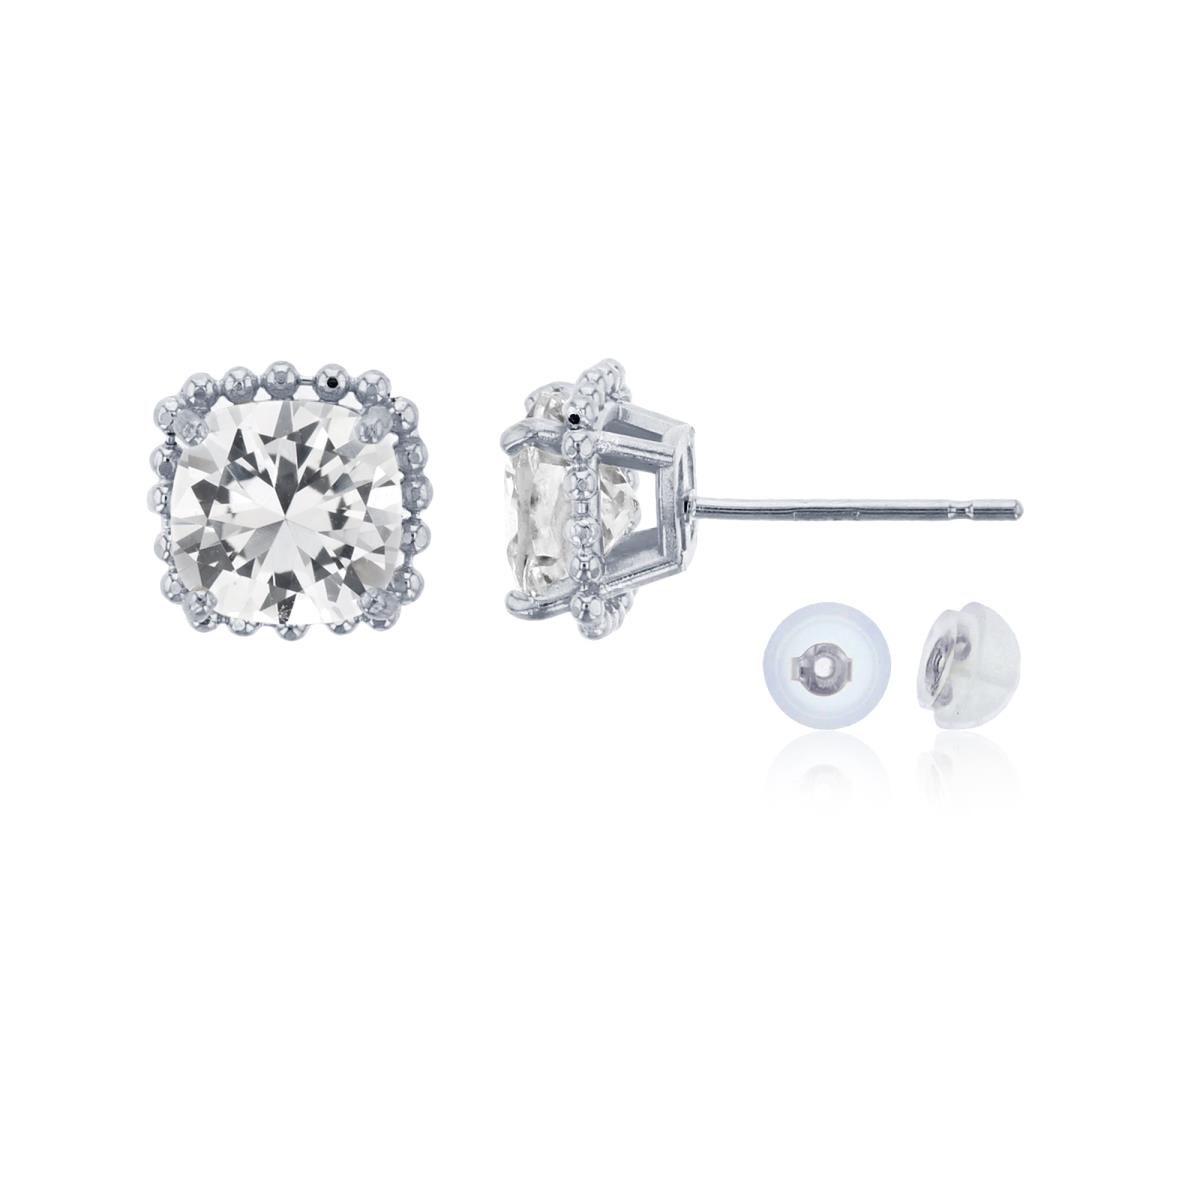 10K White Gold 6x6mm Cushion Cut Created White Sapphire Bead Frame Stud Earring with Silicone Back